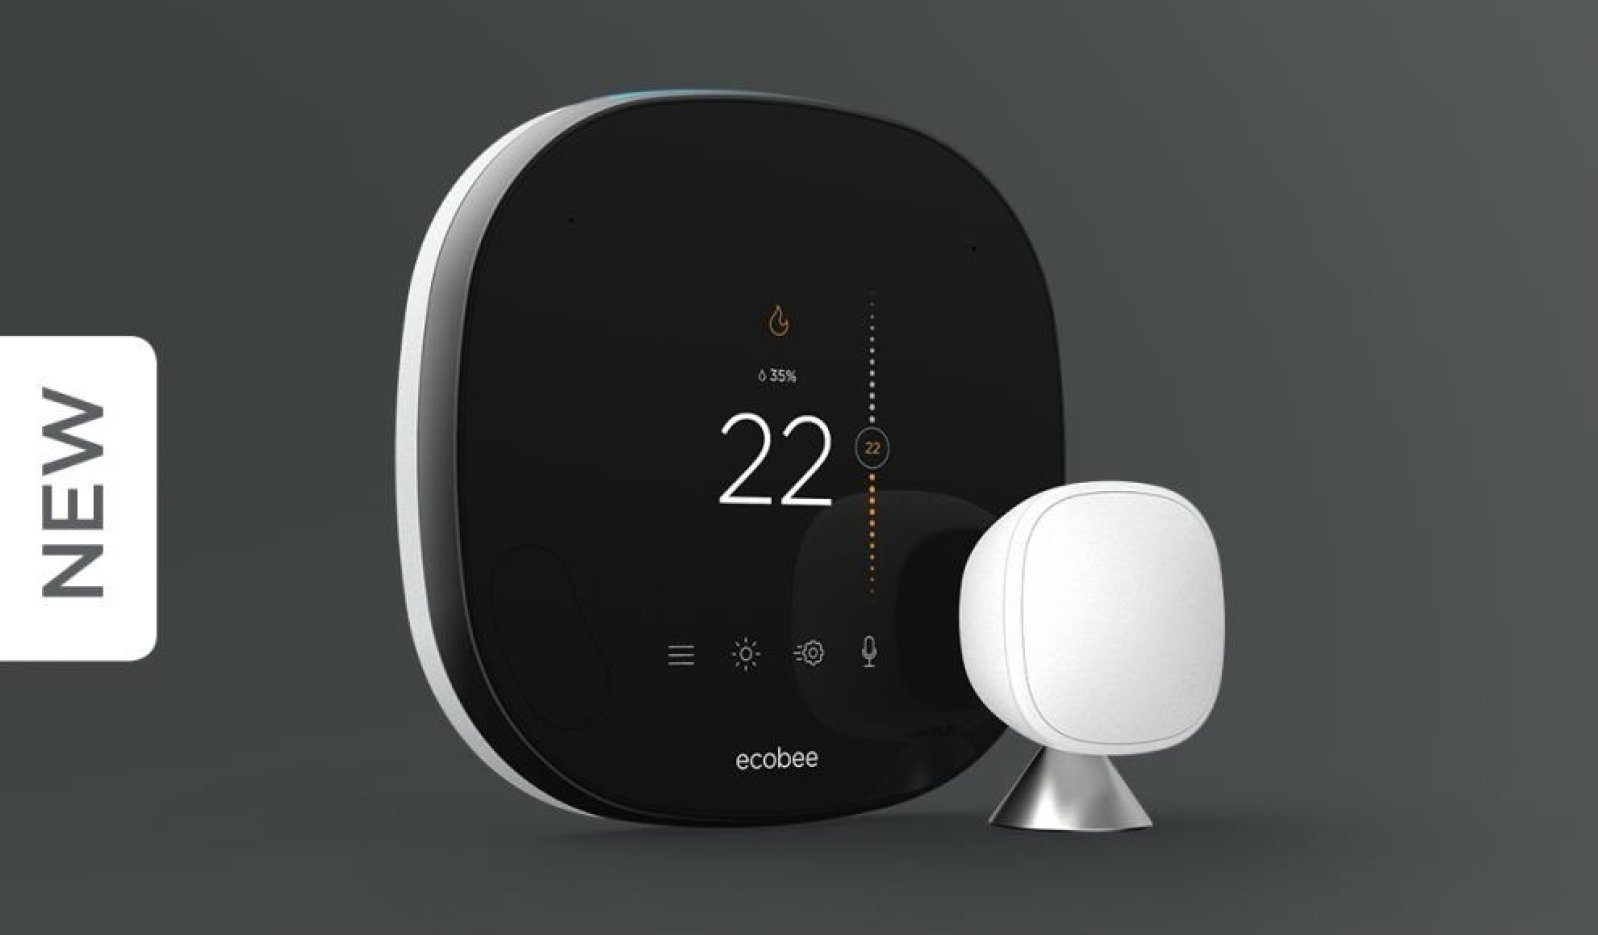 Ecobee smart thermostat with glass display pops up on Lowe's website | DeviceDaily.com